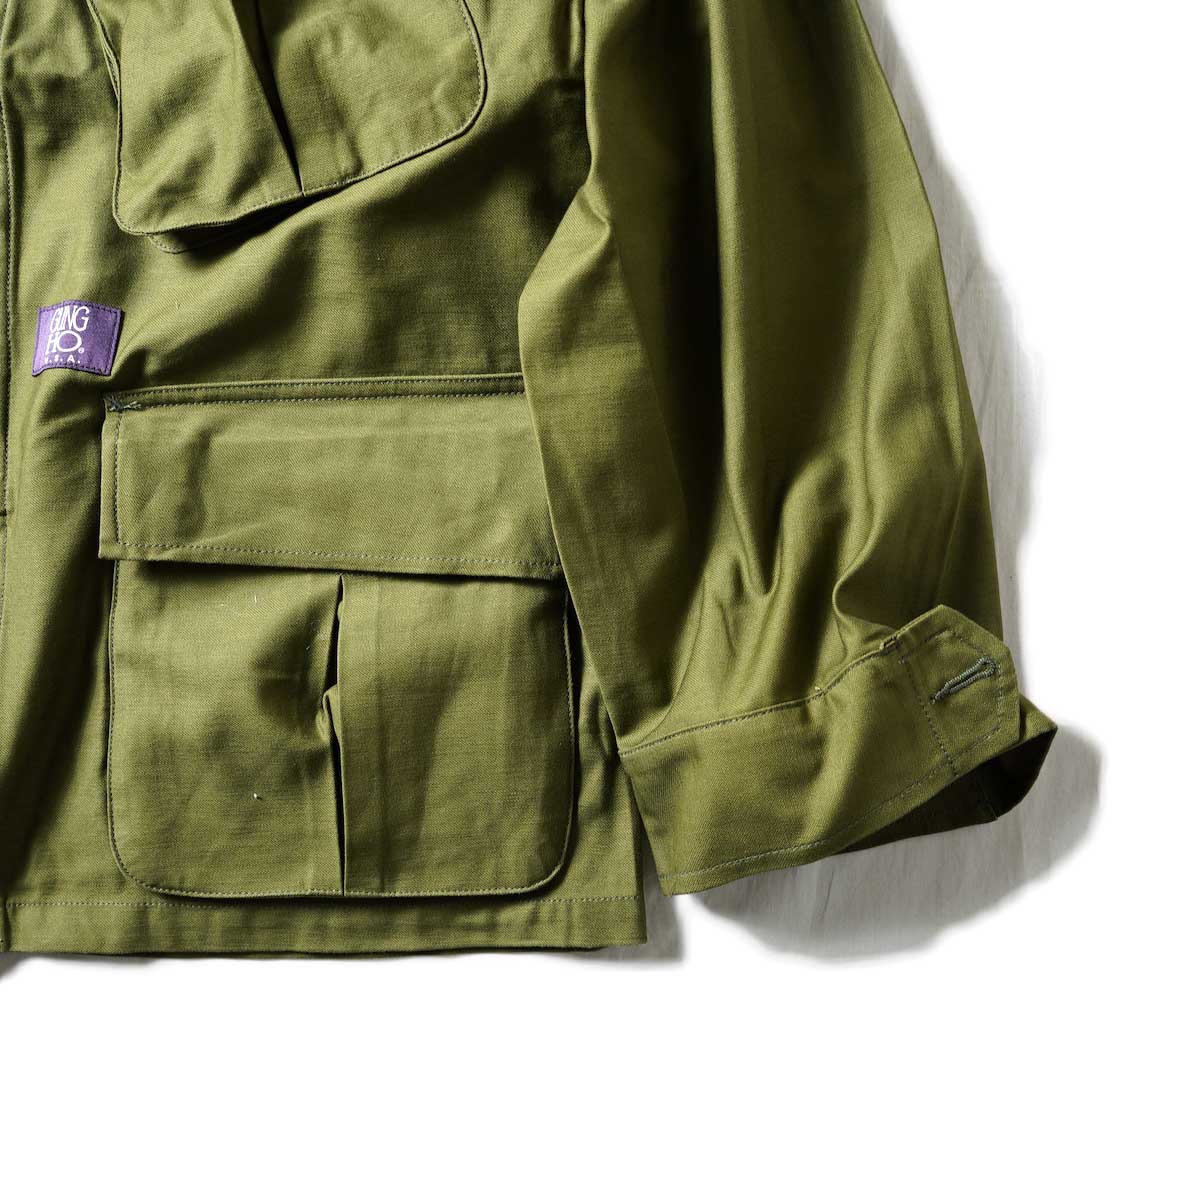 UNIVERSAL PRODUCTS / Gung Ho Fatigue Jacket (Olive)裾、袖